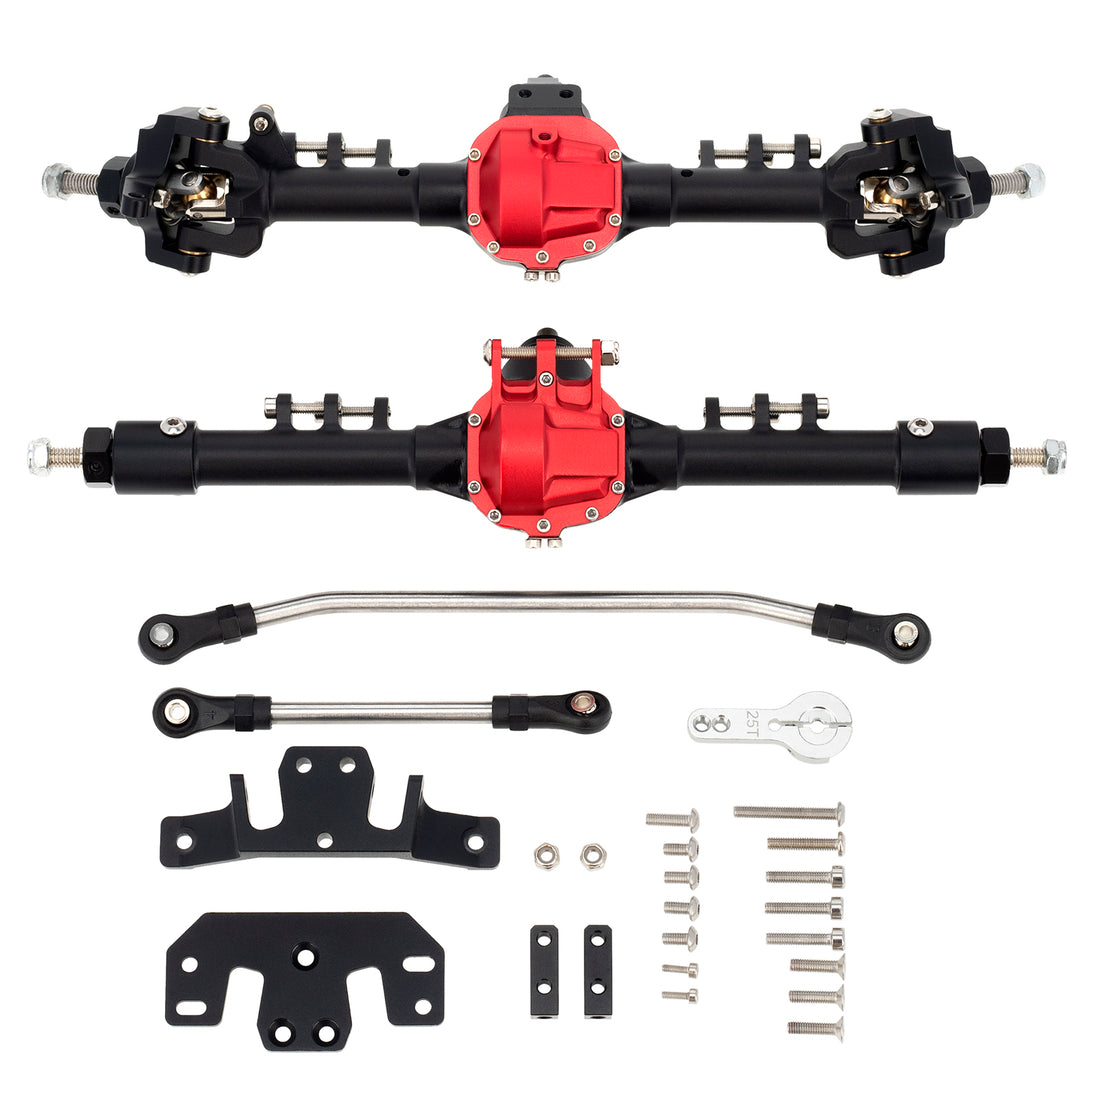 Metal Large Steering Integrated Axle Front/Rear Axle for Axial SCX10